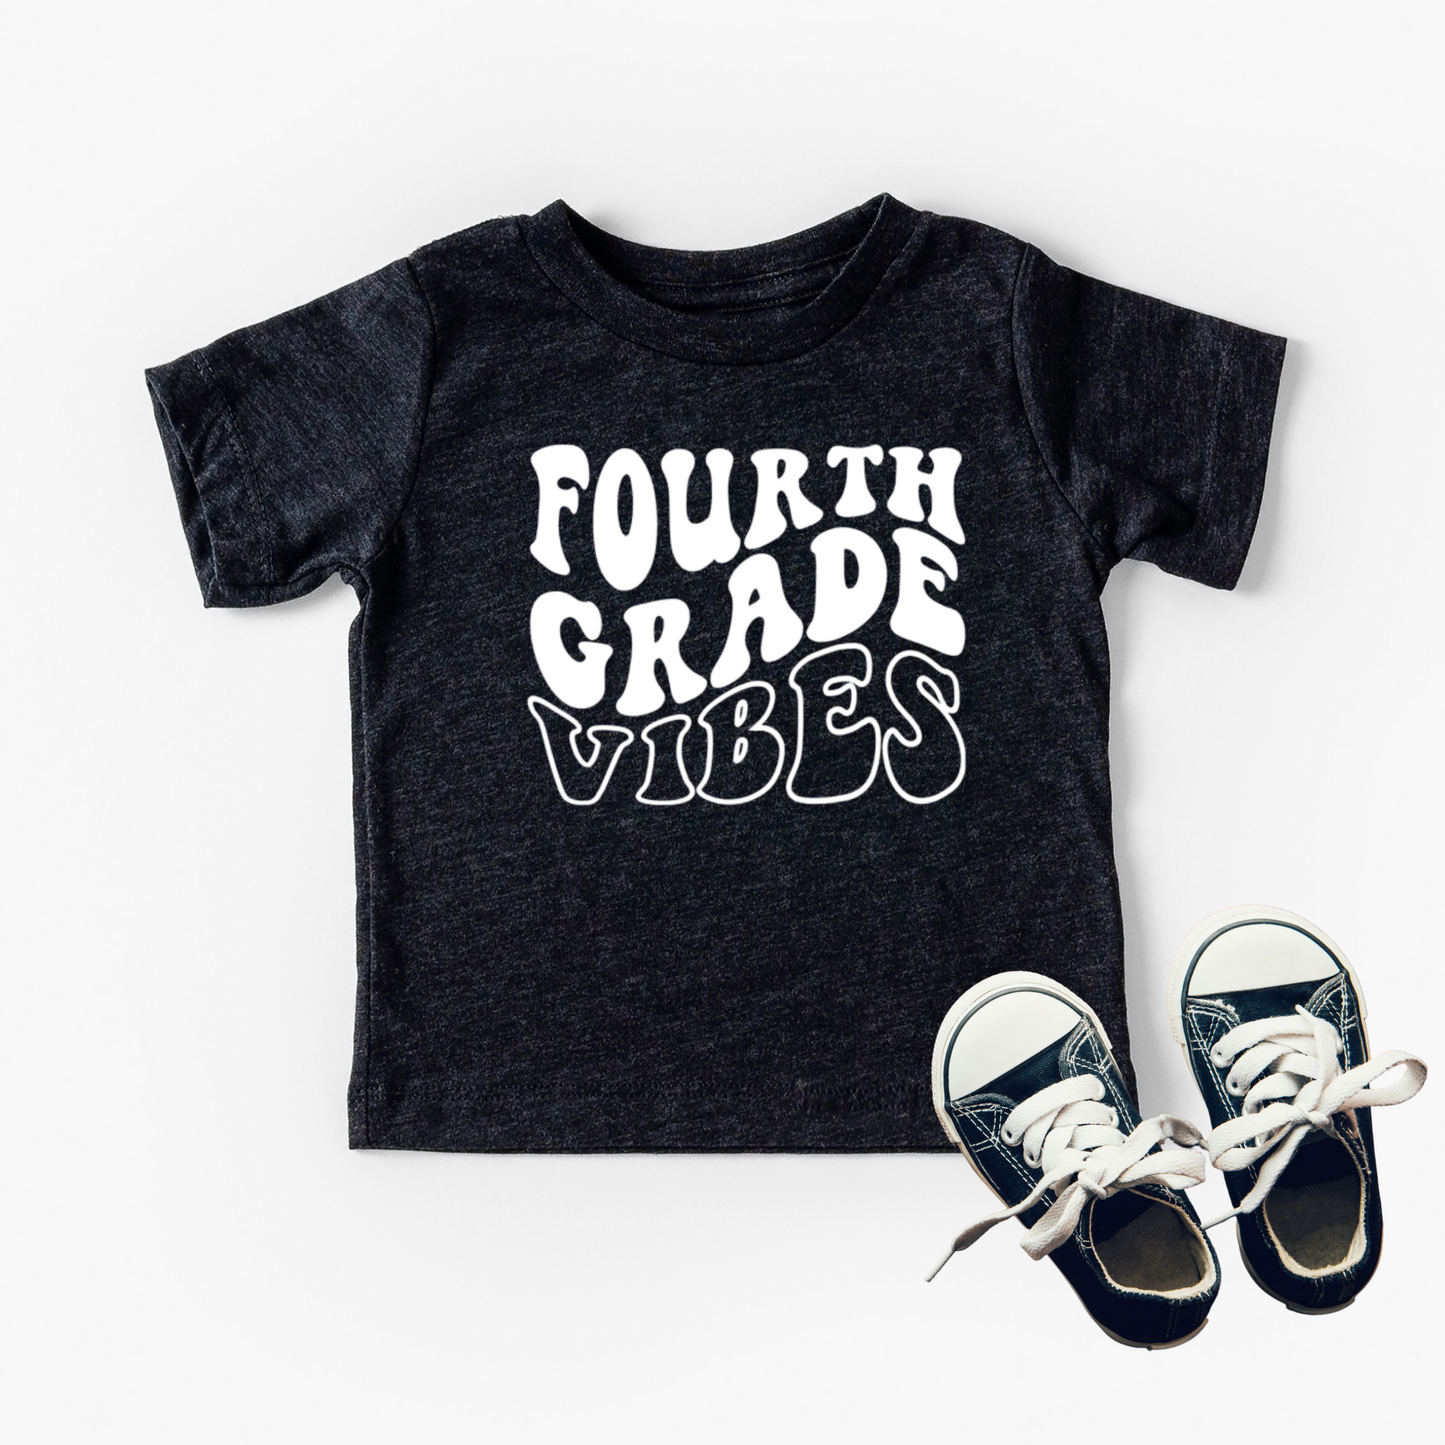 Fourth Grade Vibes | Short Sleeve Youth Tee